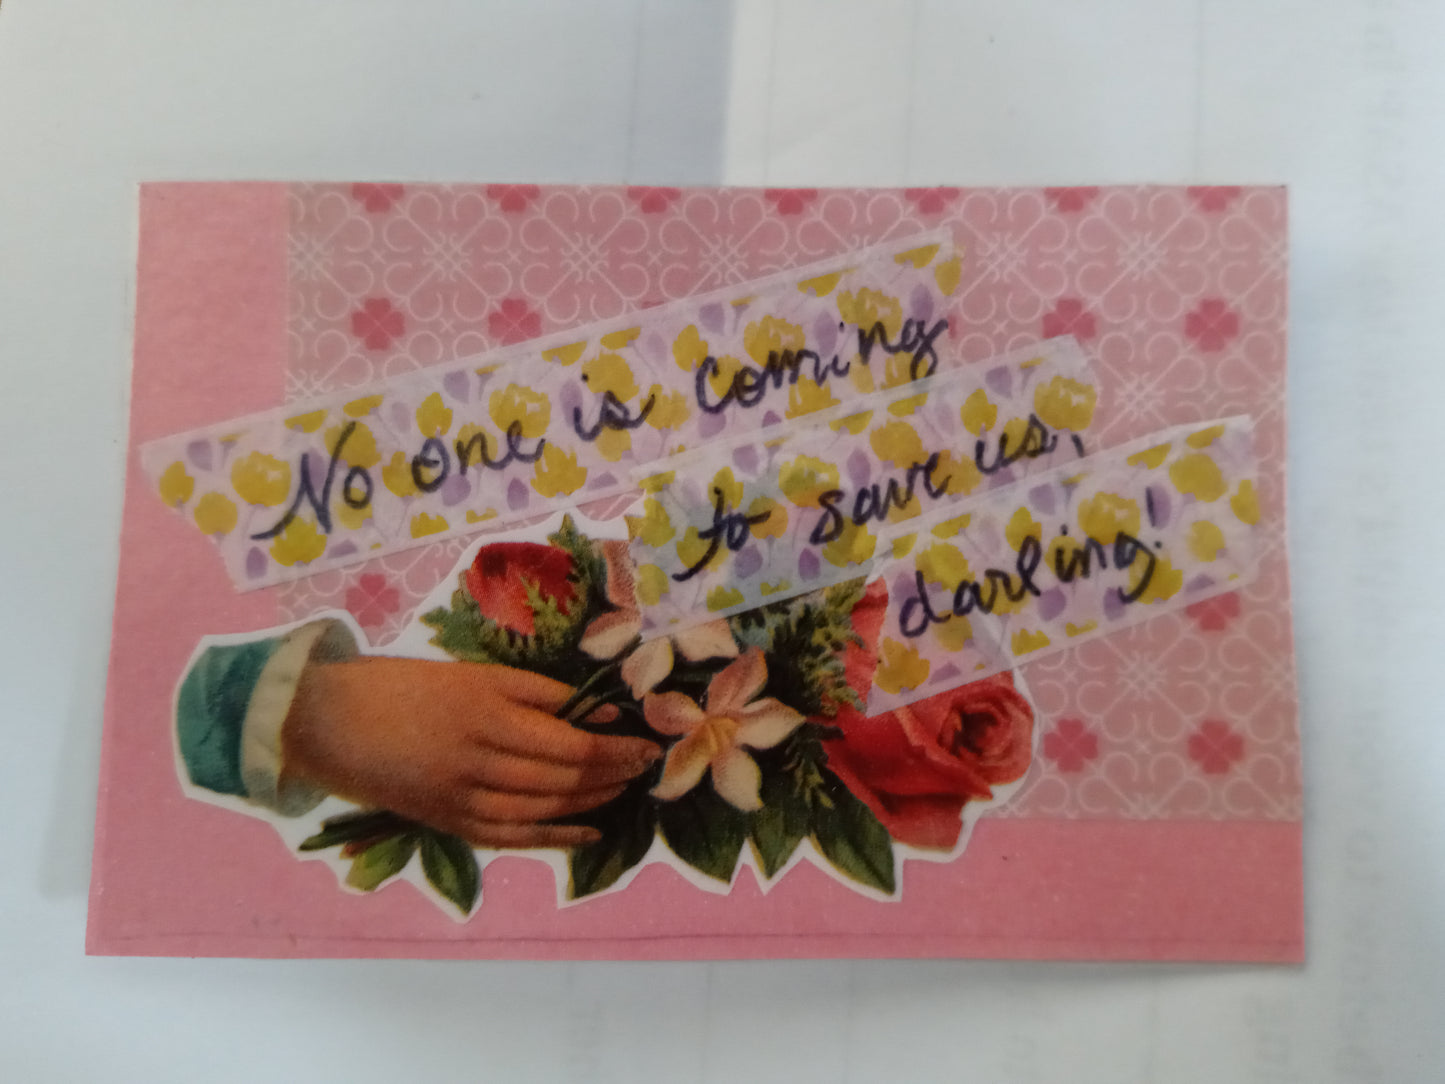 A rectangular handmade sticker on pink paper, with a variety of patterns, and a Victorian style greeting of a hand with flowers. Overlaid on purple and yellow tape is handwritten the words "No one is coming to save us, darling!"